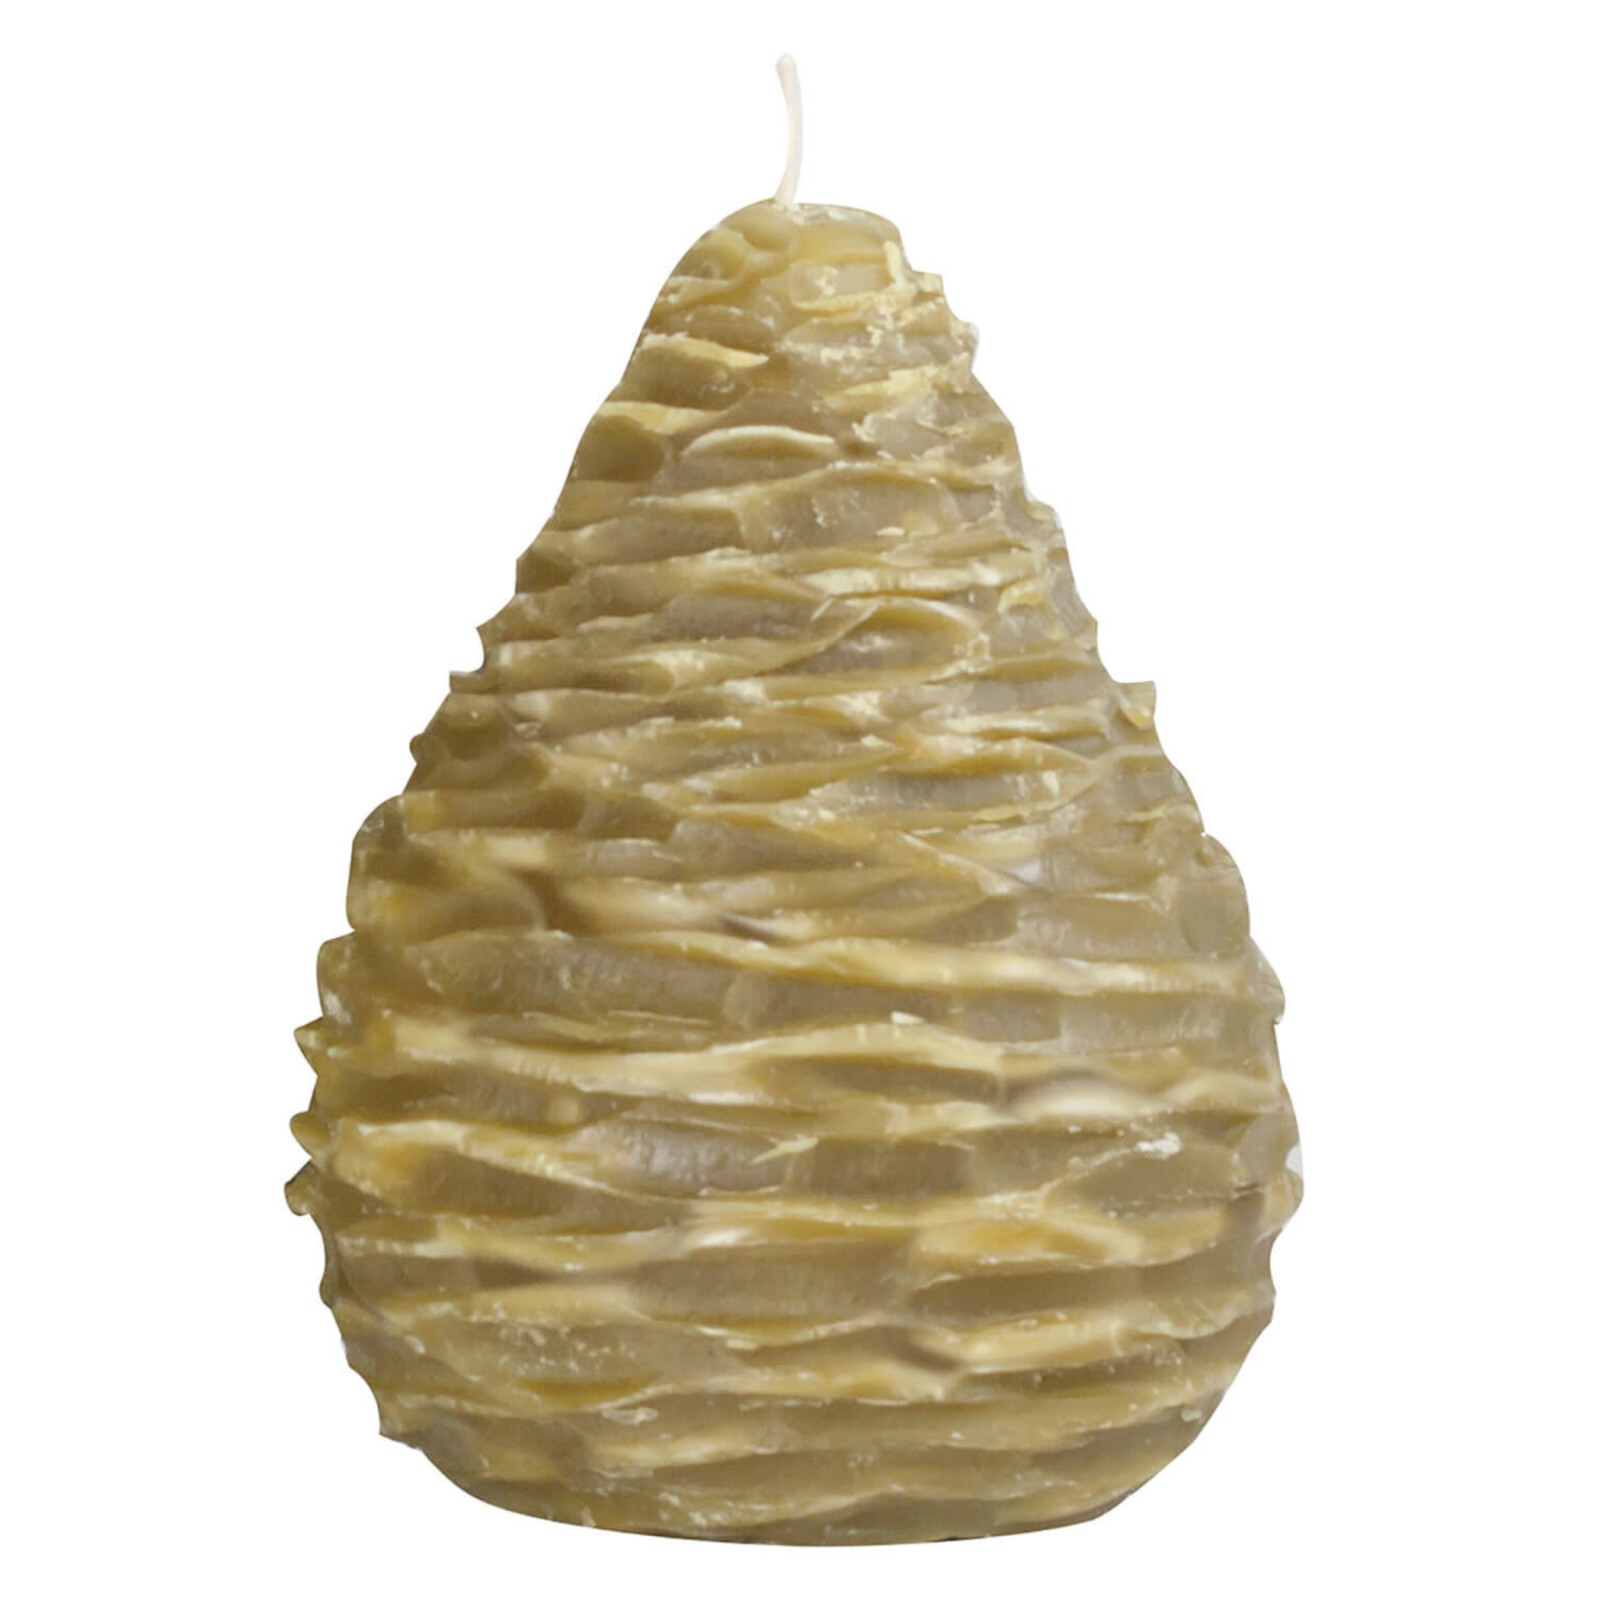 Sullivans PINE CONE CANDLE Moss  40 Hrs Burn Time        PINE34MOSS loading=